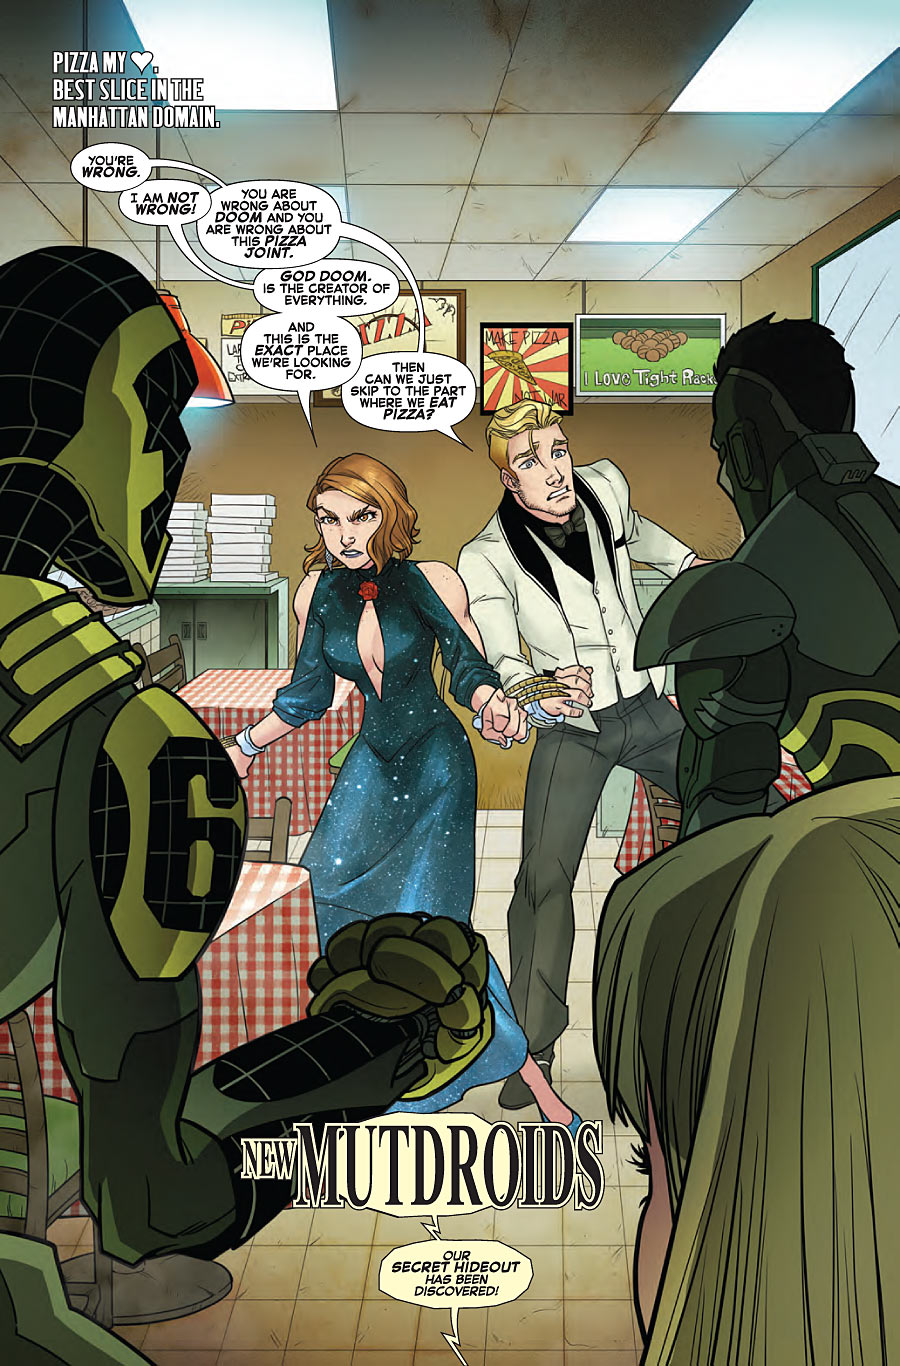 Star-Lord and Kitty Pryde #2